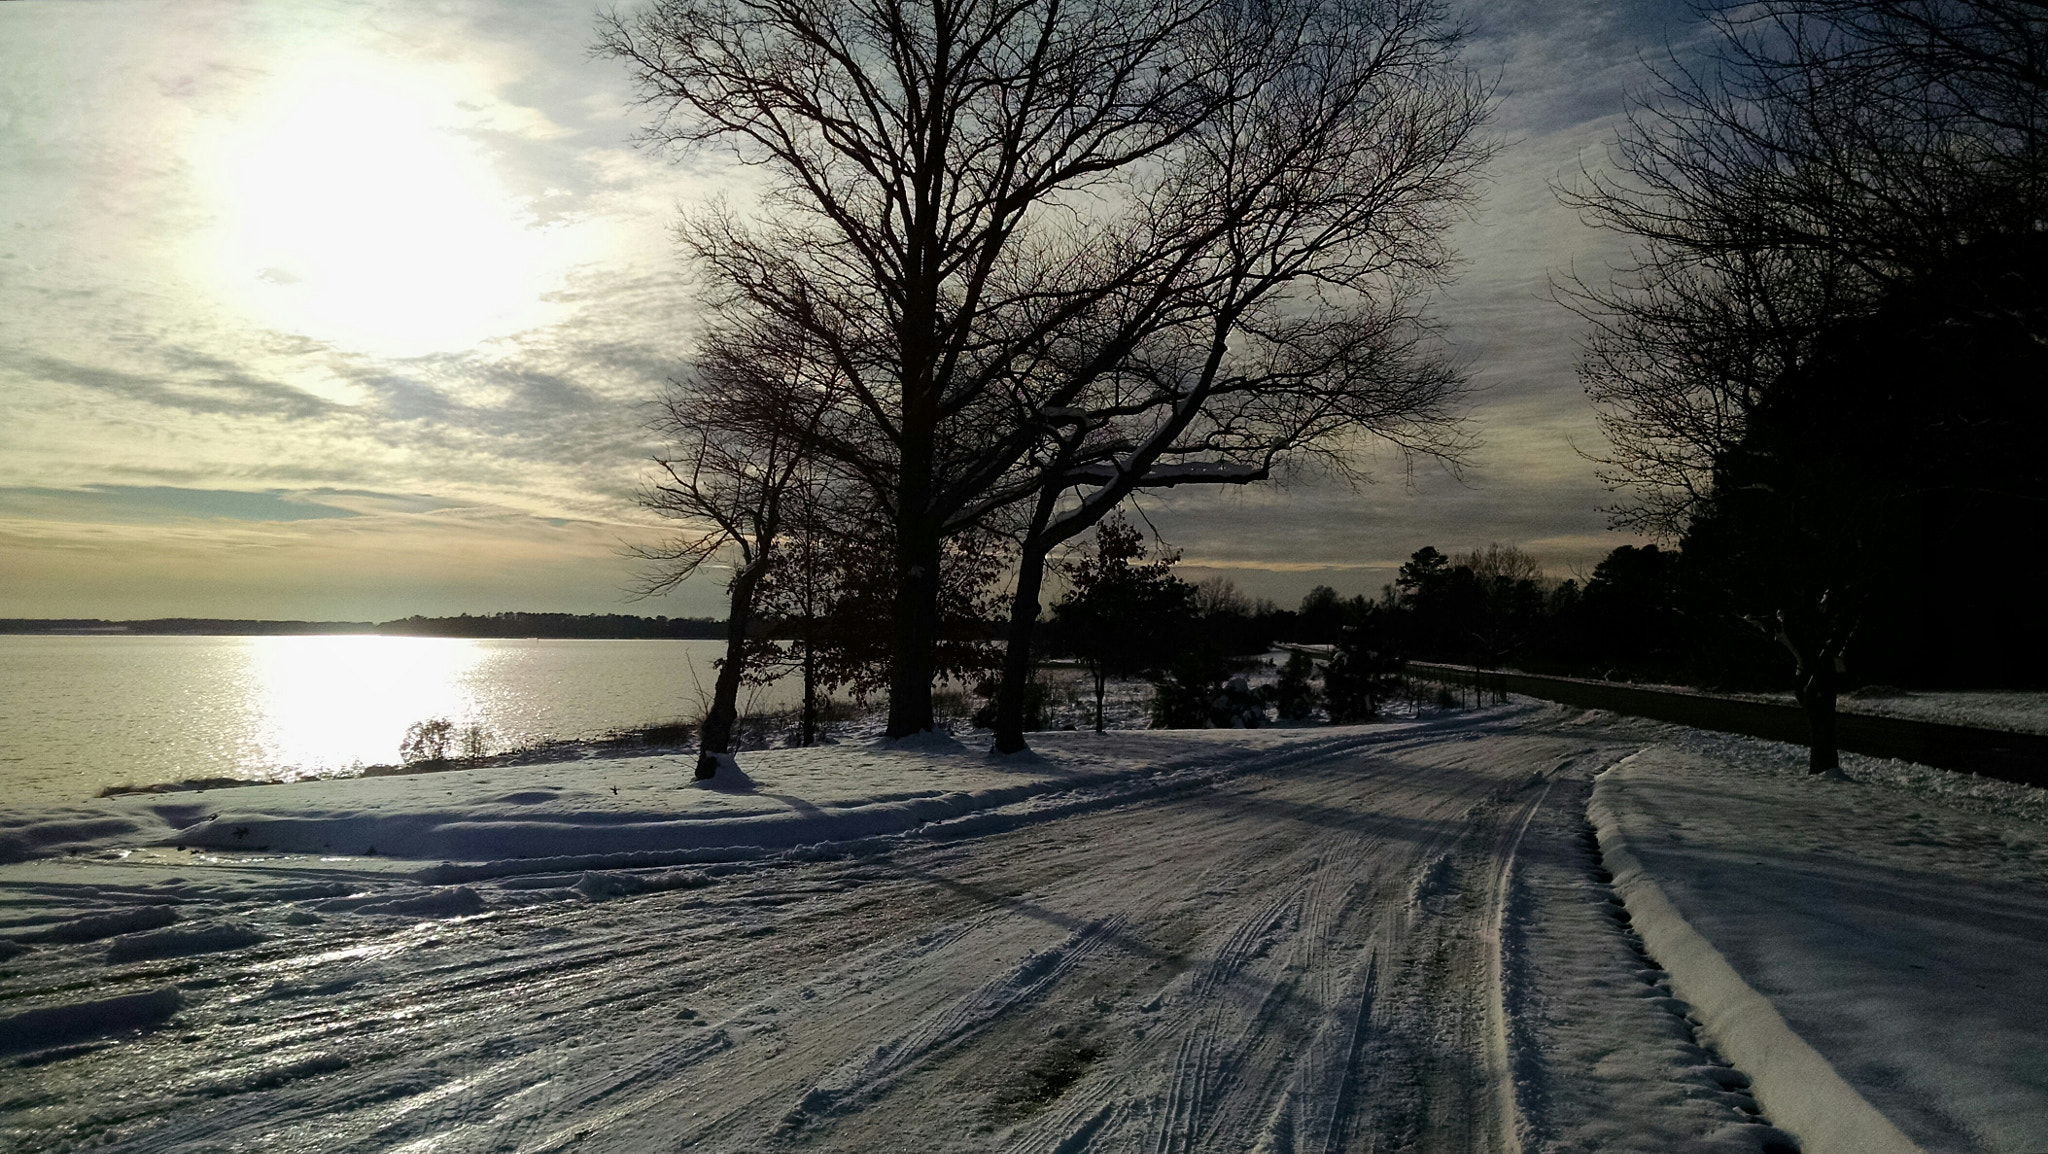 Motorola Droid Mini sample photo. Chilly drive along the james river photography